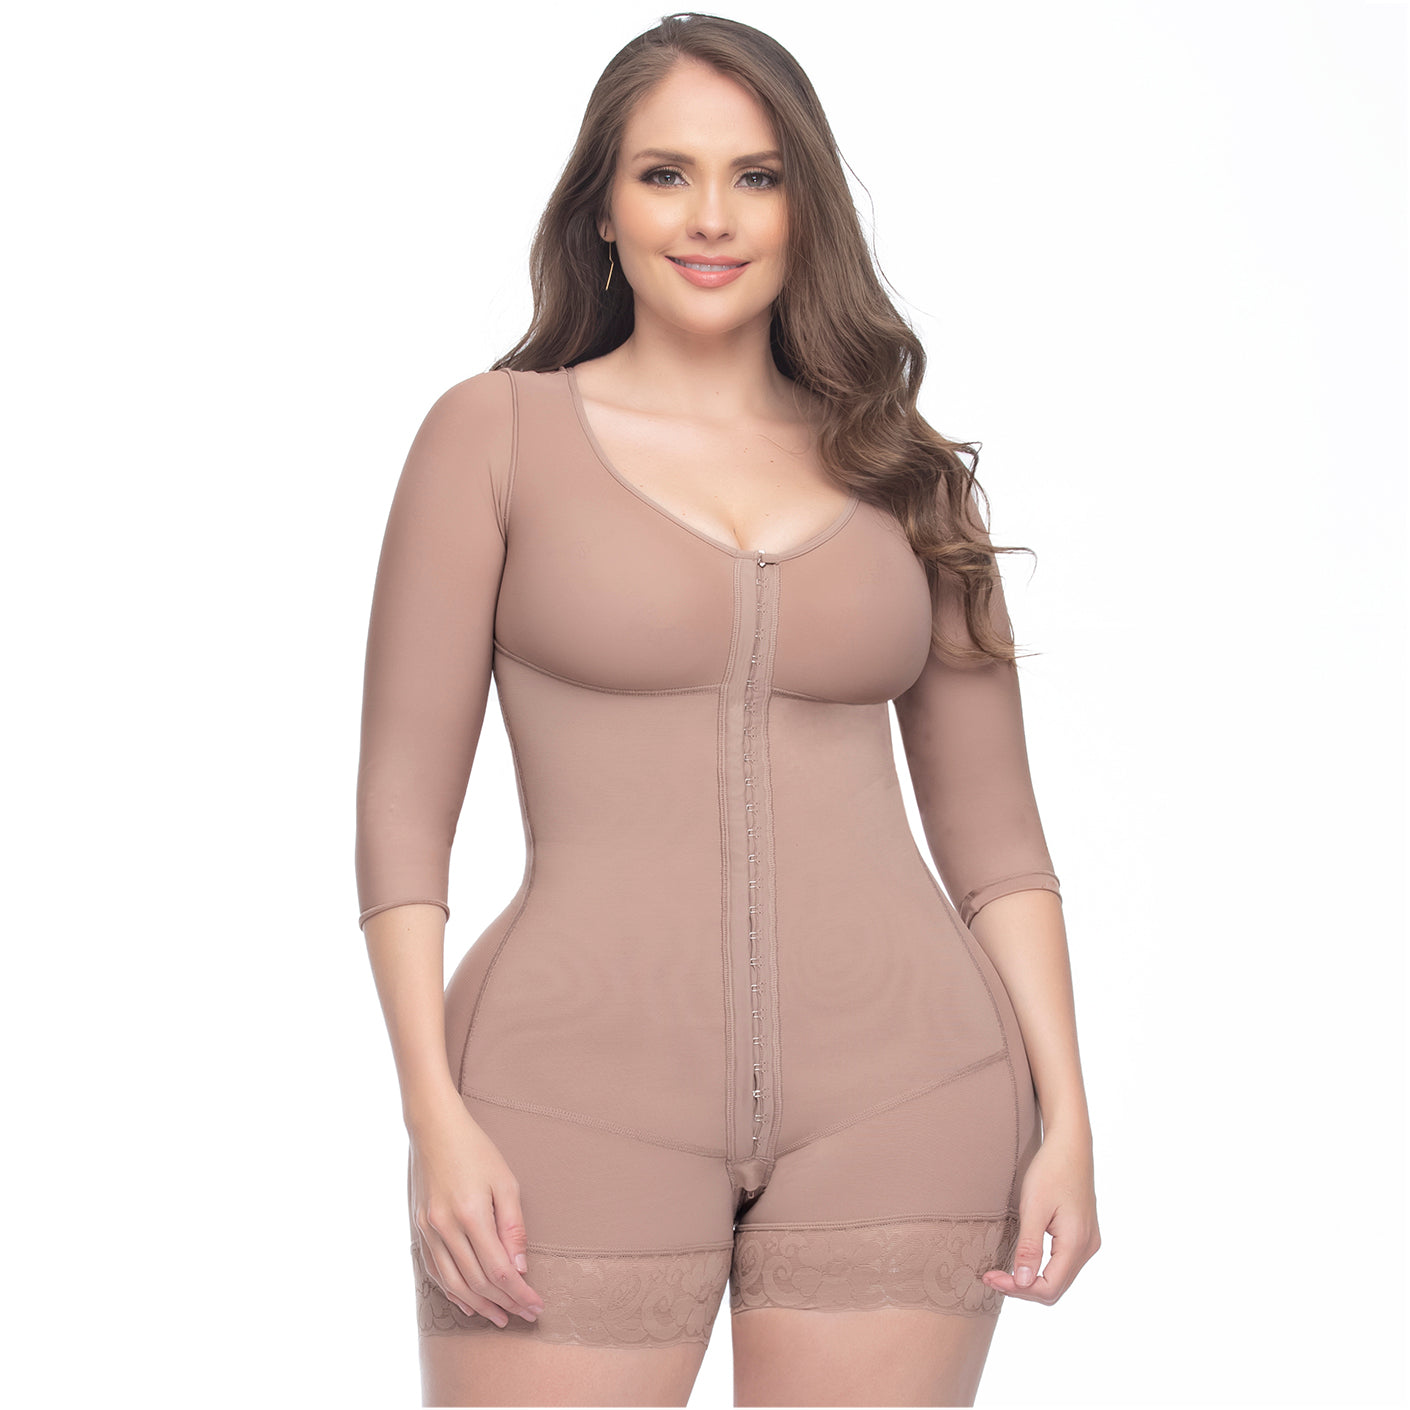 UpLady F 6221 Women Built-in Post Surgery Full Shapewear Bra Long Slee –  Curved By Angeliques